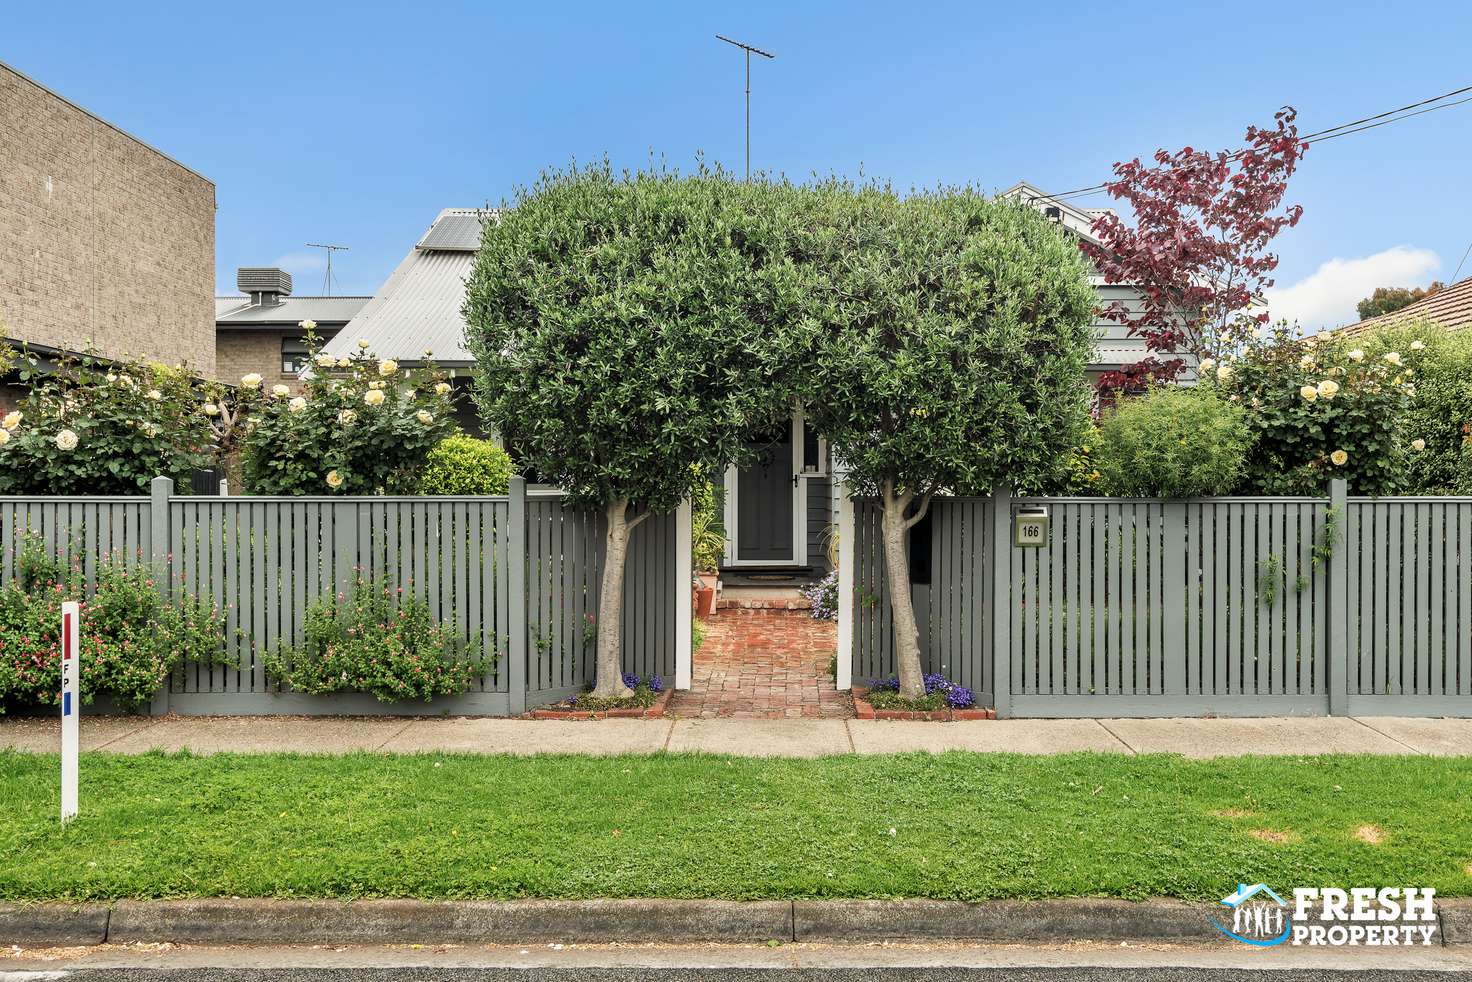 Main view of Homely house listing, 166 Verner St, Geelong VIC 3220